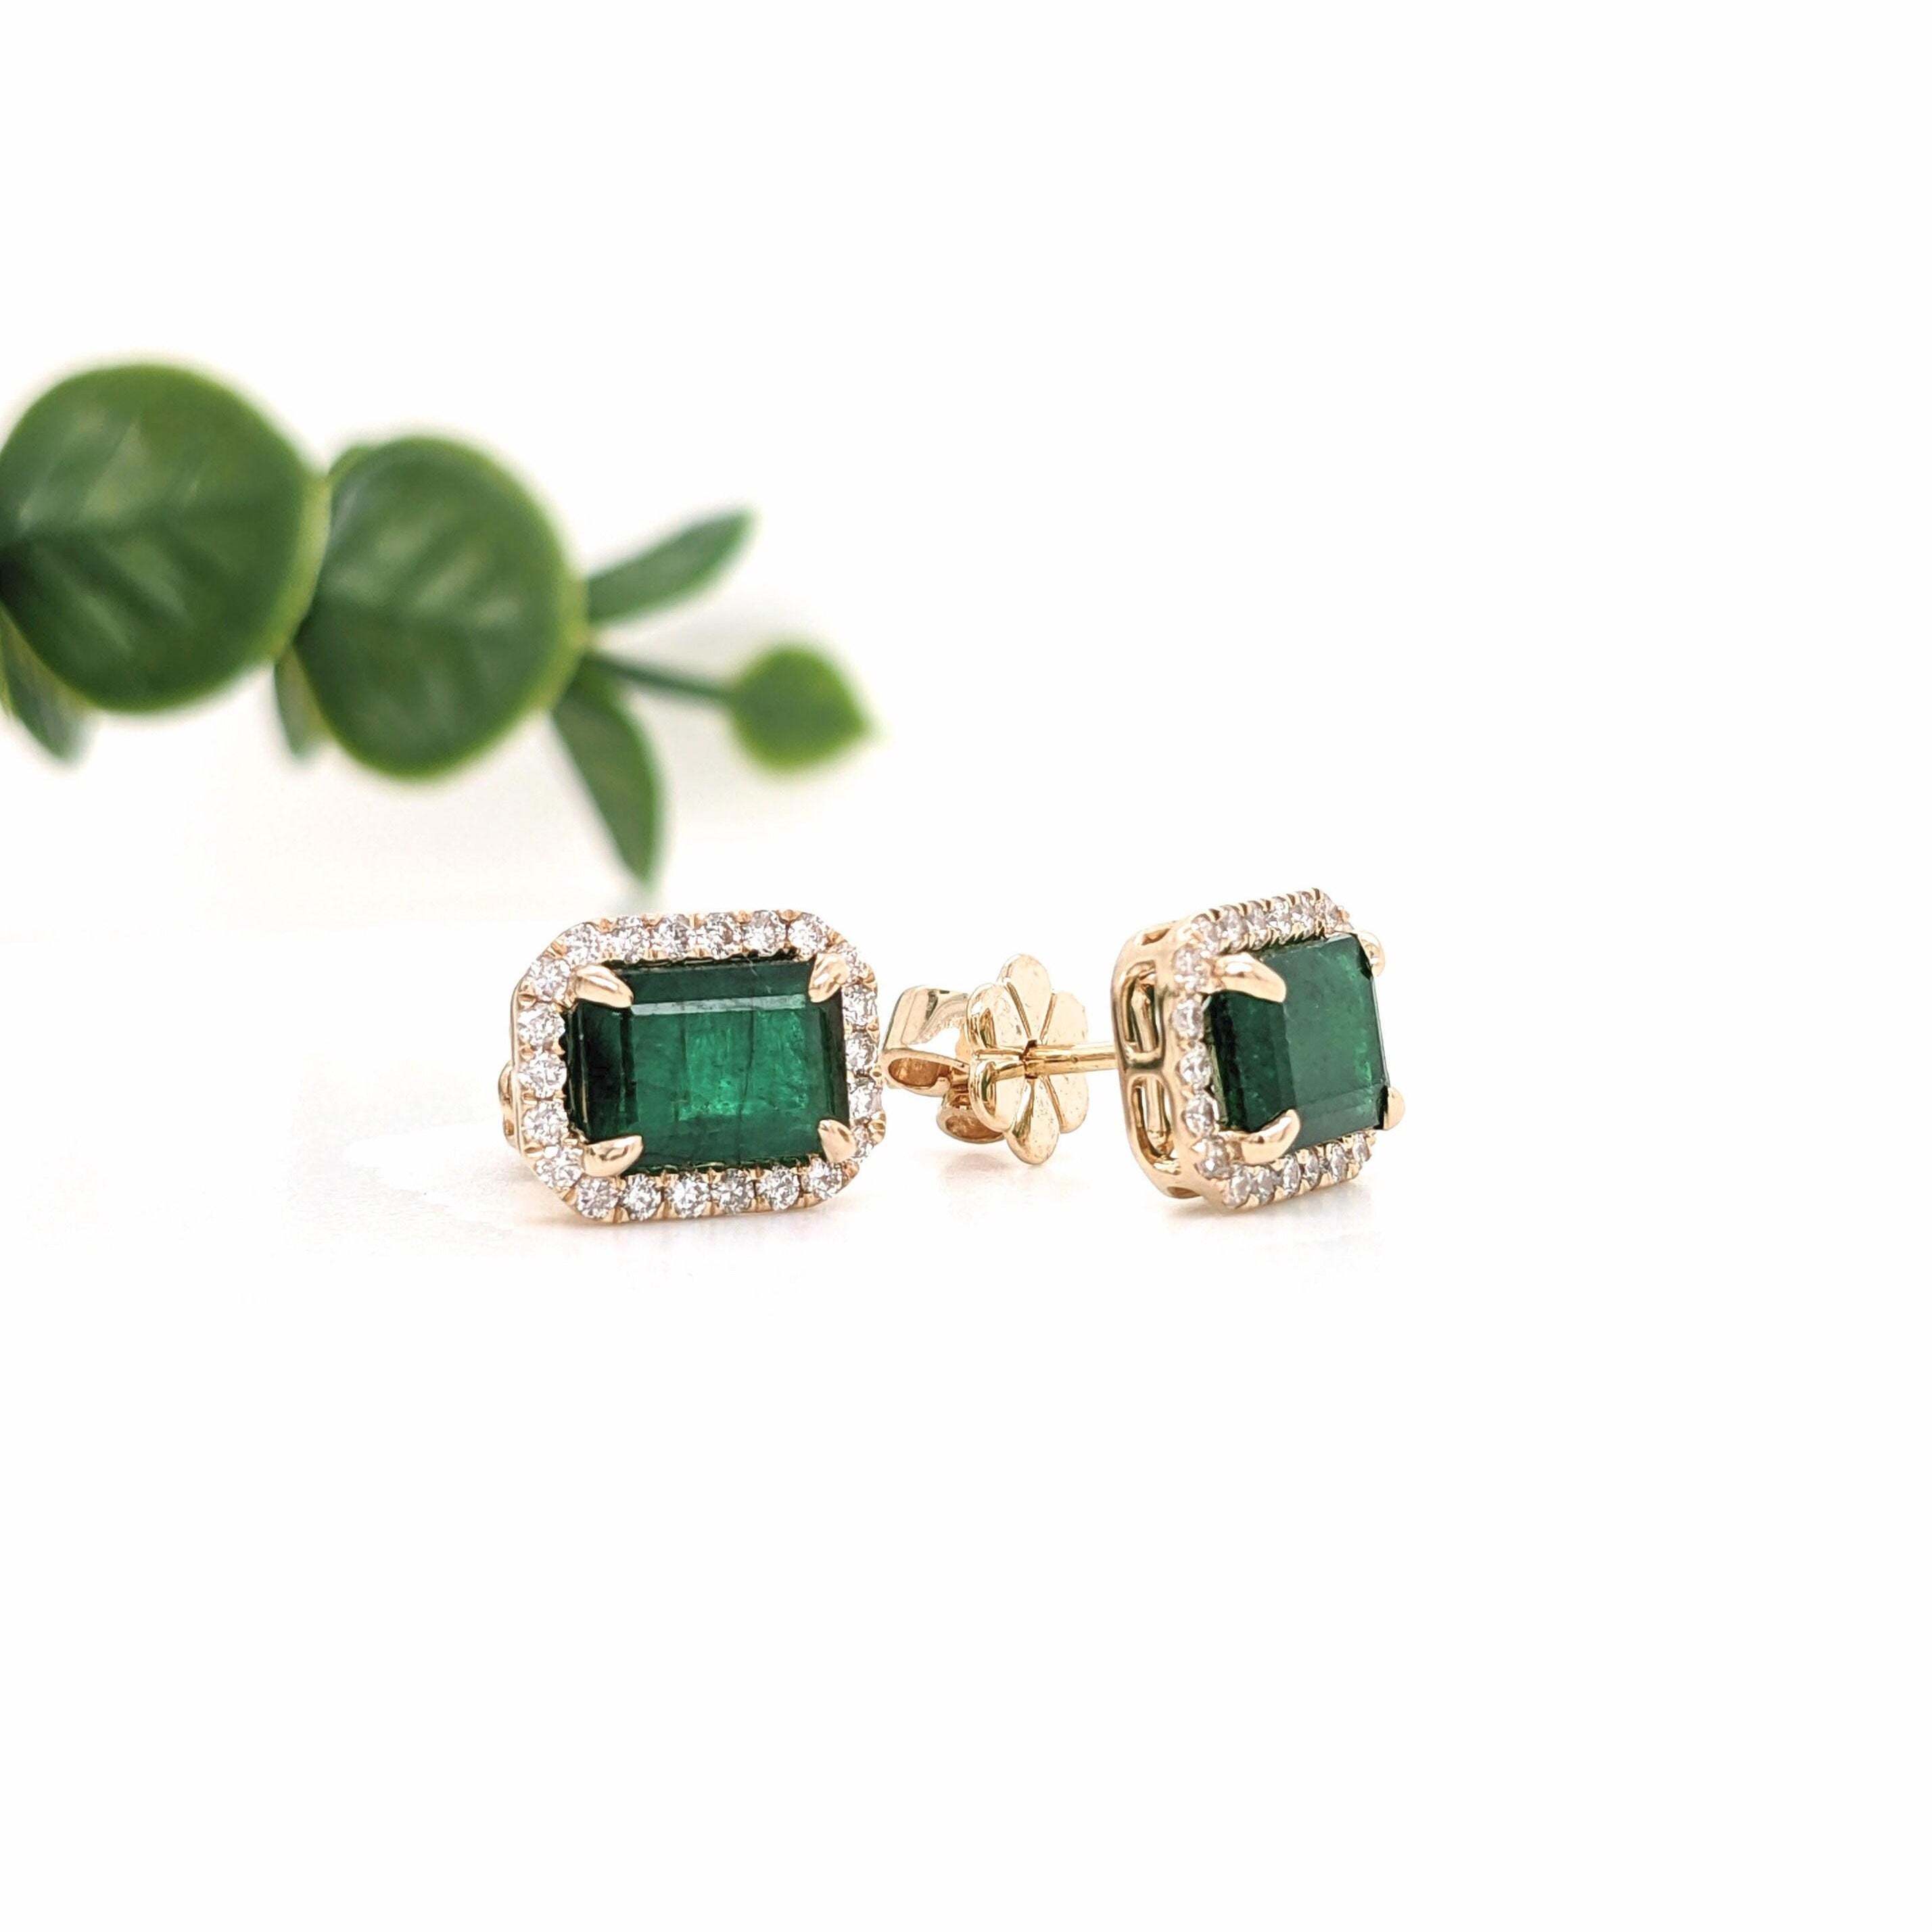 Forest Green Emerald Studs with a Diamond Halo in Solid 14K White Gold | 7x5mm